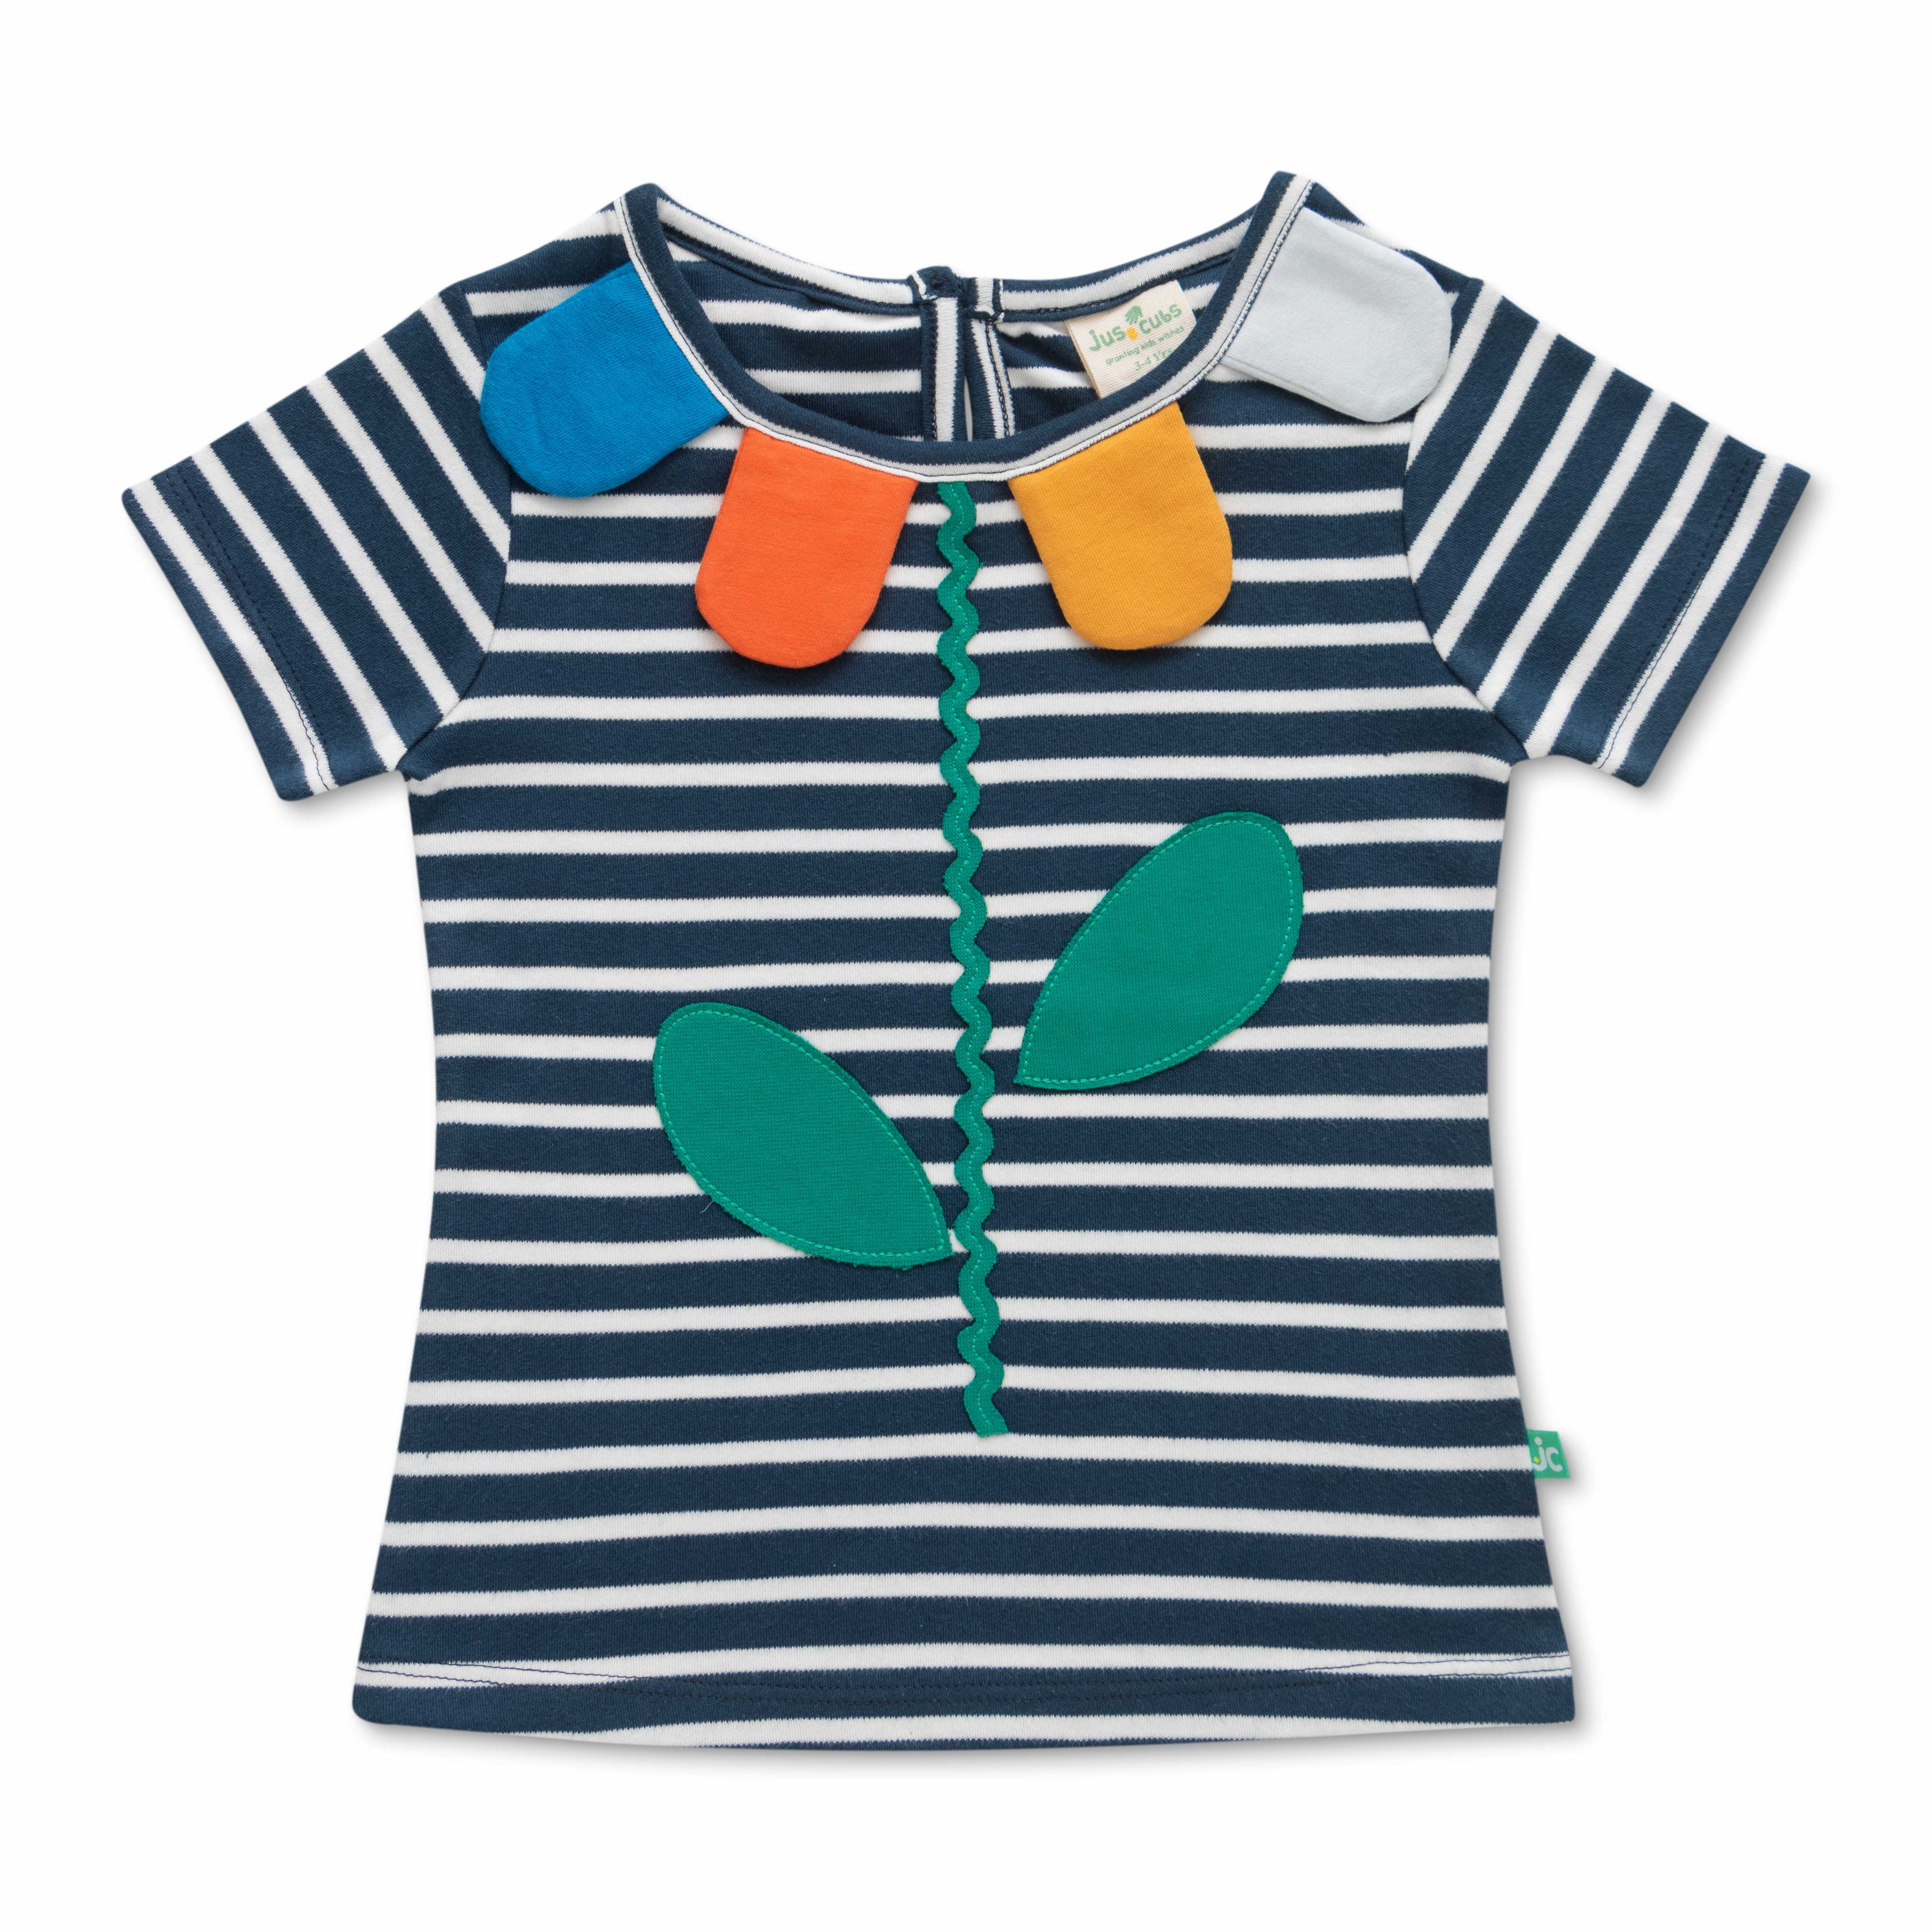 Girls Jersey Toddlers Embroidered T-Shirt - Navy Blue